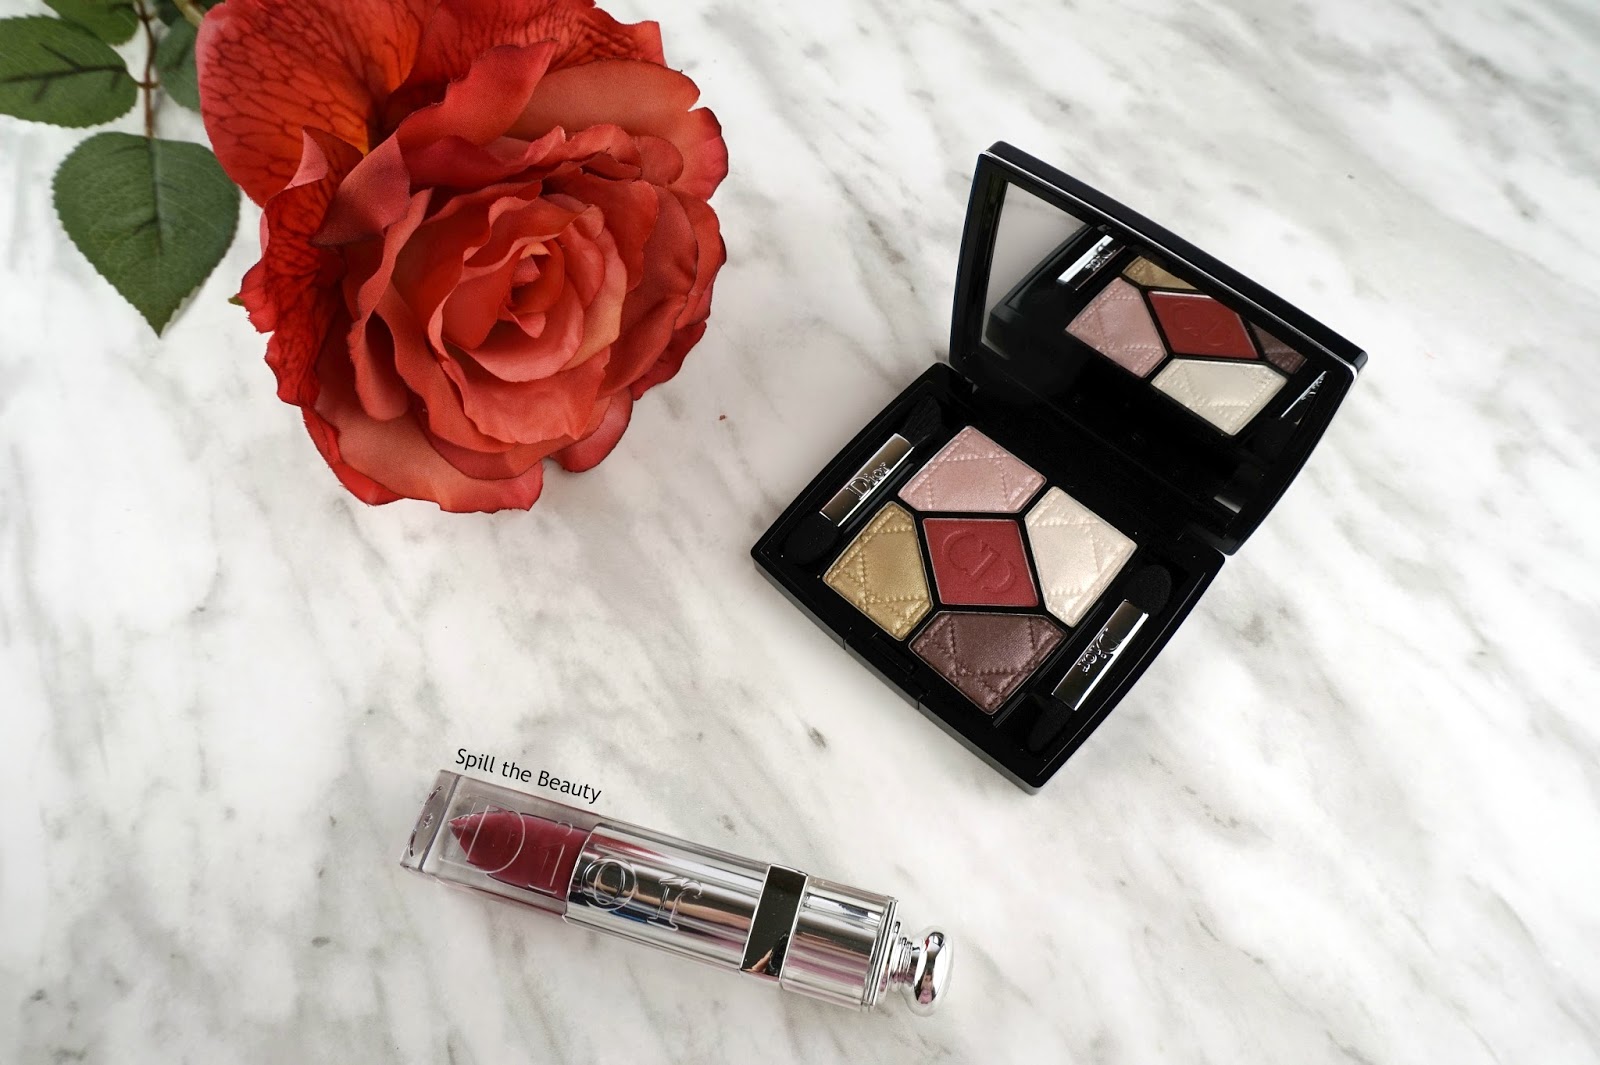 Dior 5 Couleurs Eyeshadow Palette in ‘Trafalgar’, and Dior Addict Fluid Stick in ‘Trompe L’Oeil’ – Review, Swatches, and Look